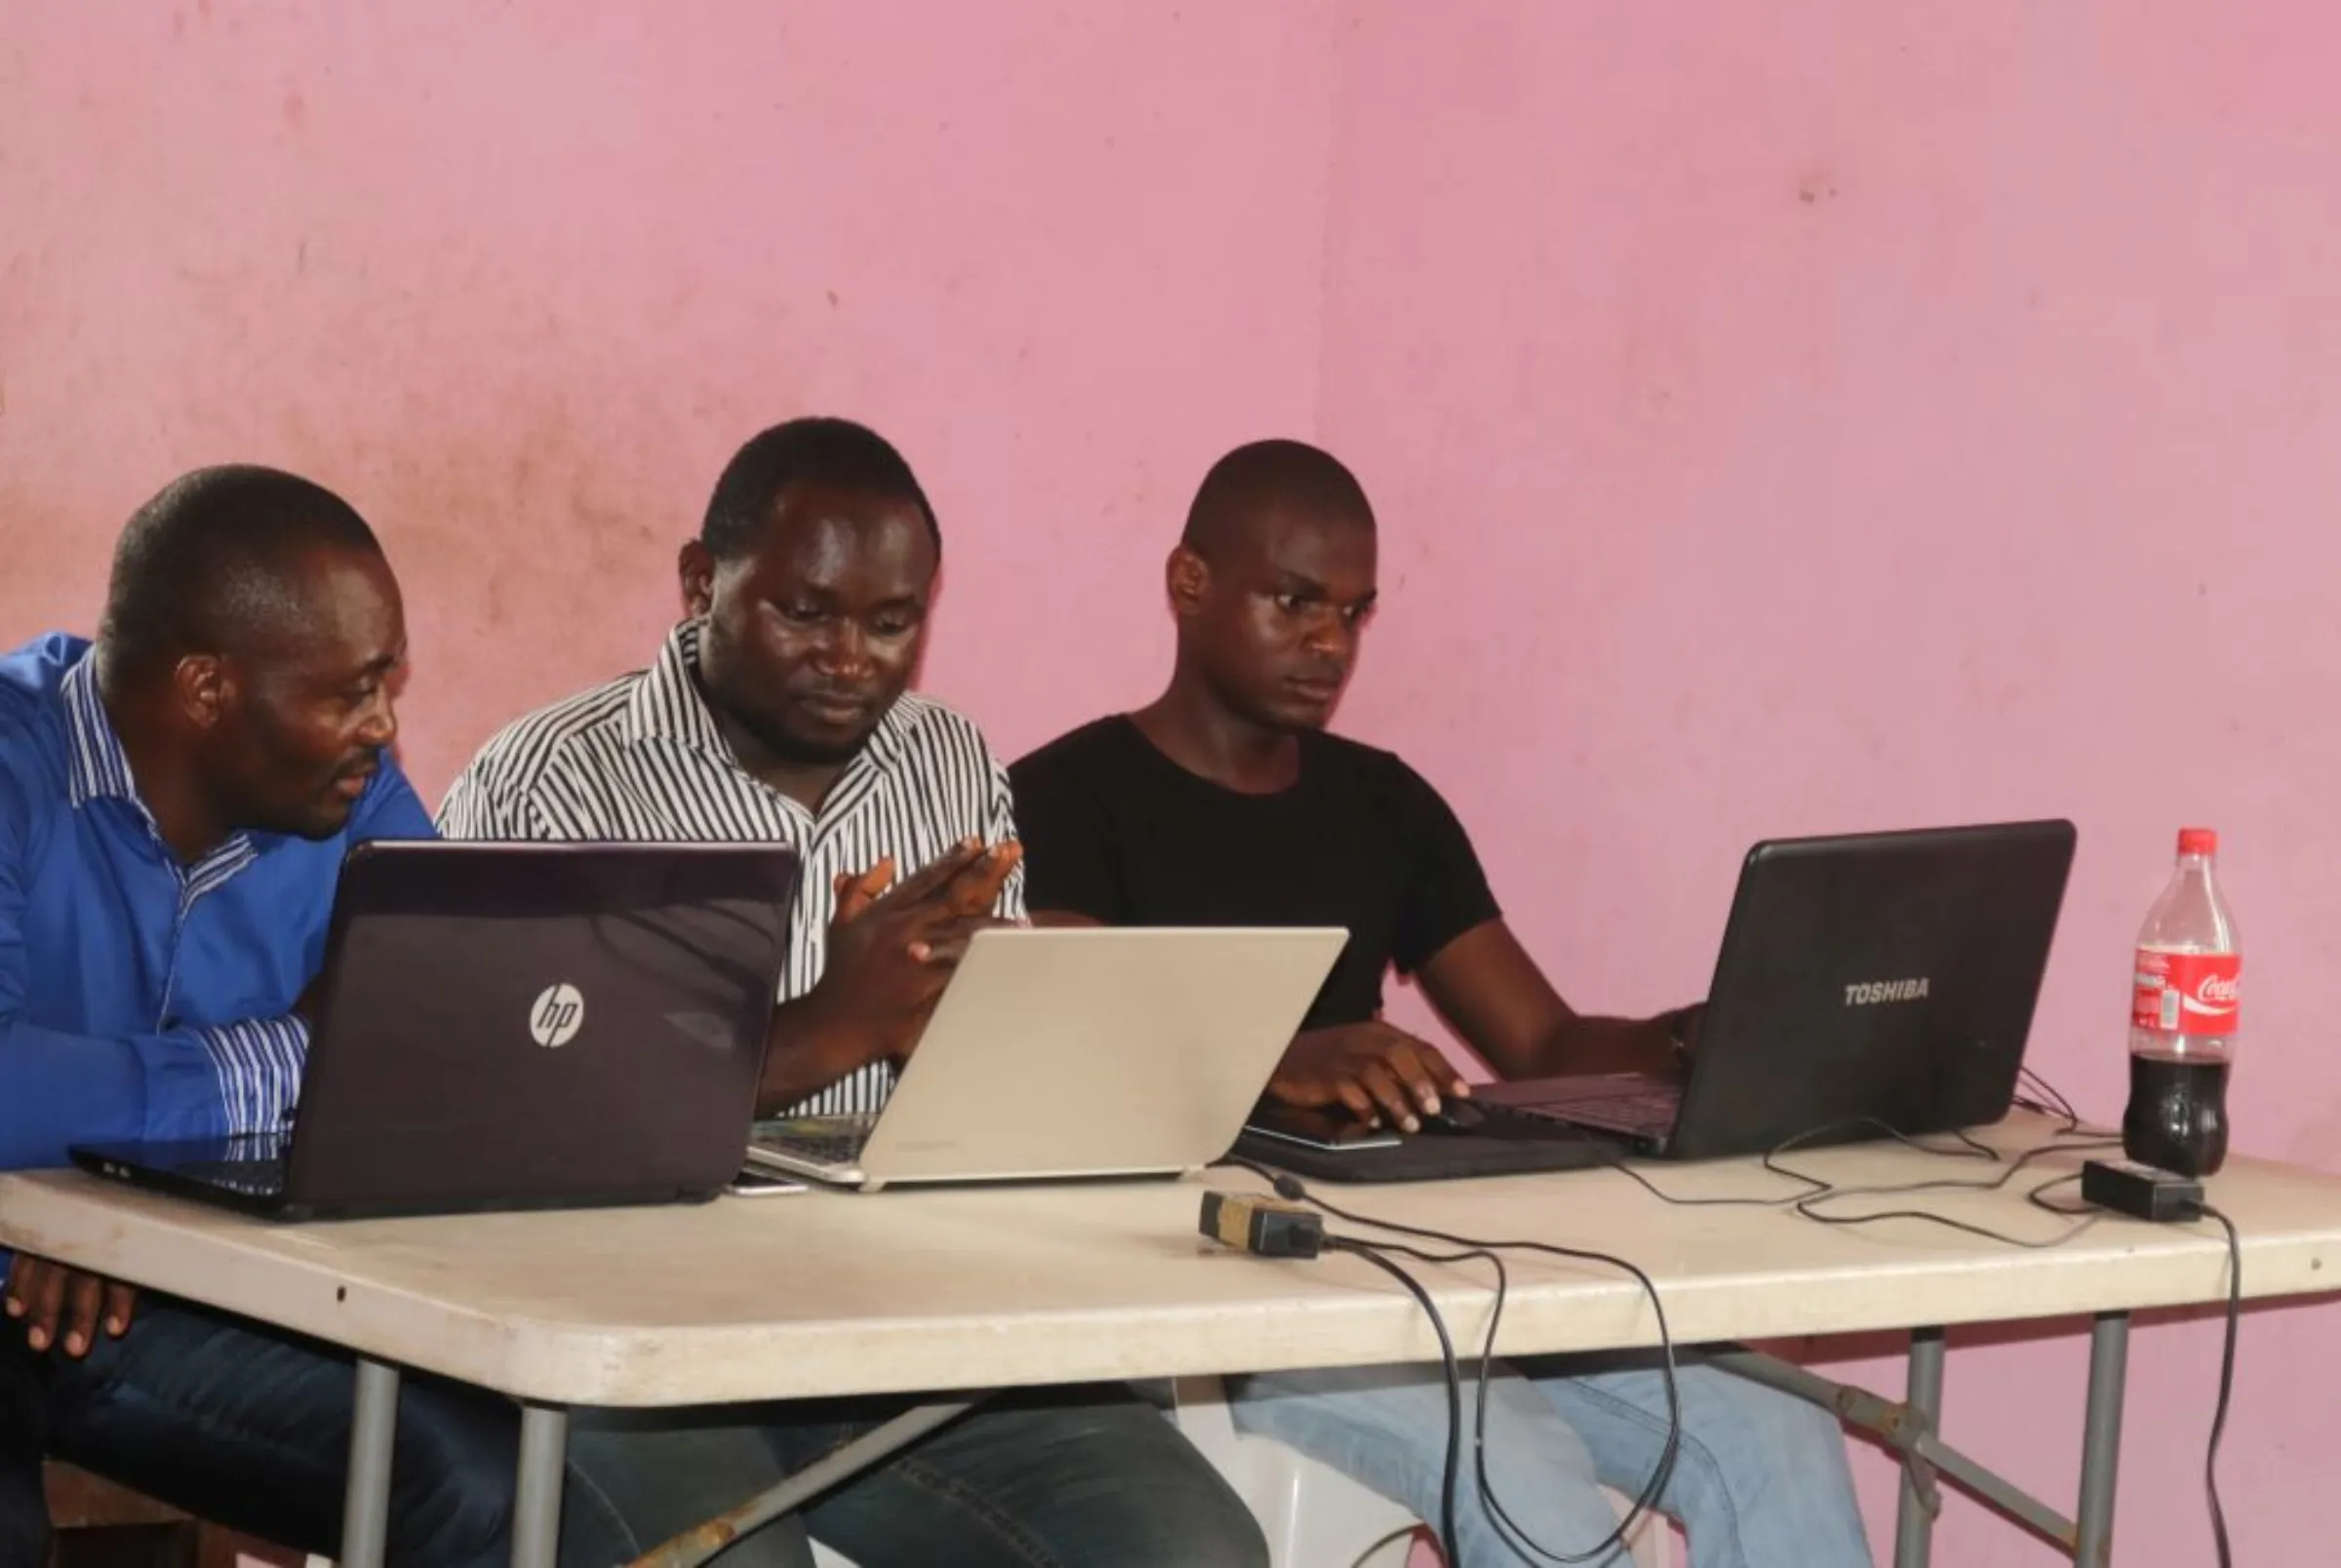 Young startup promoters work on their computers in New Bonako village, Cameroon March 28, 2017